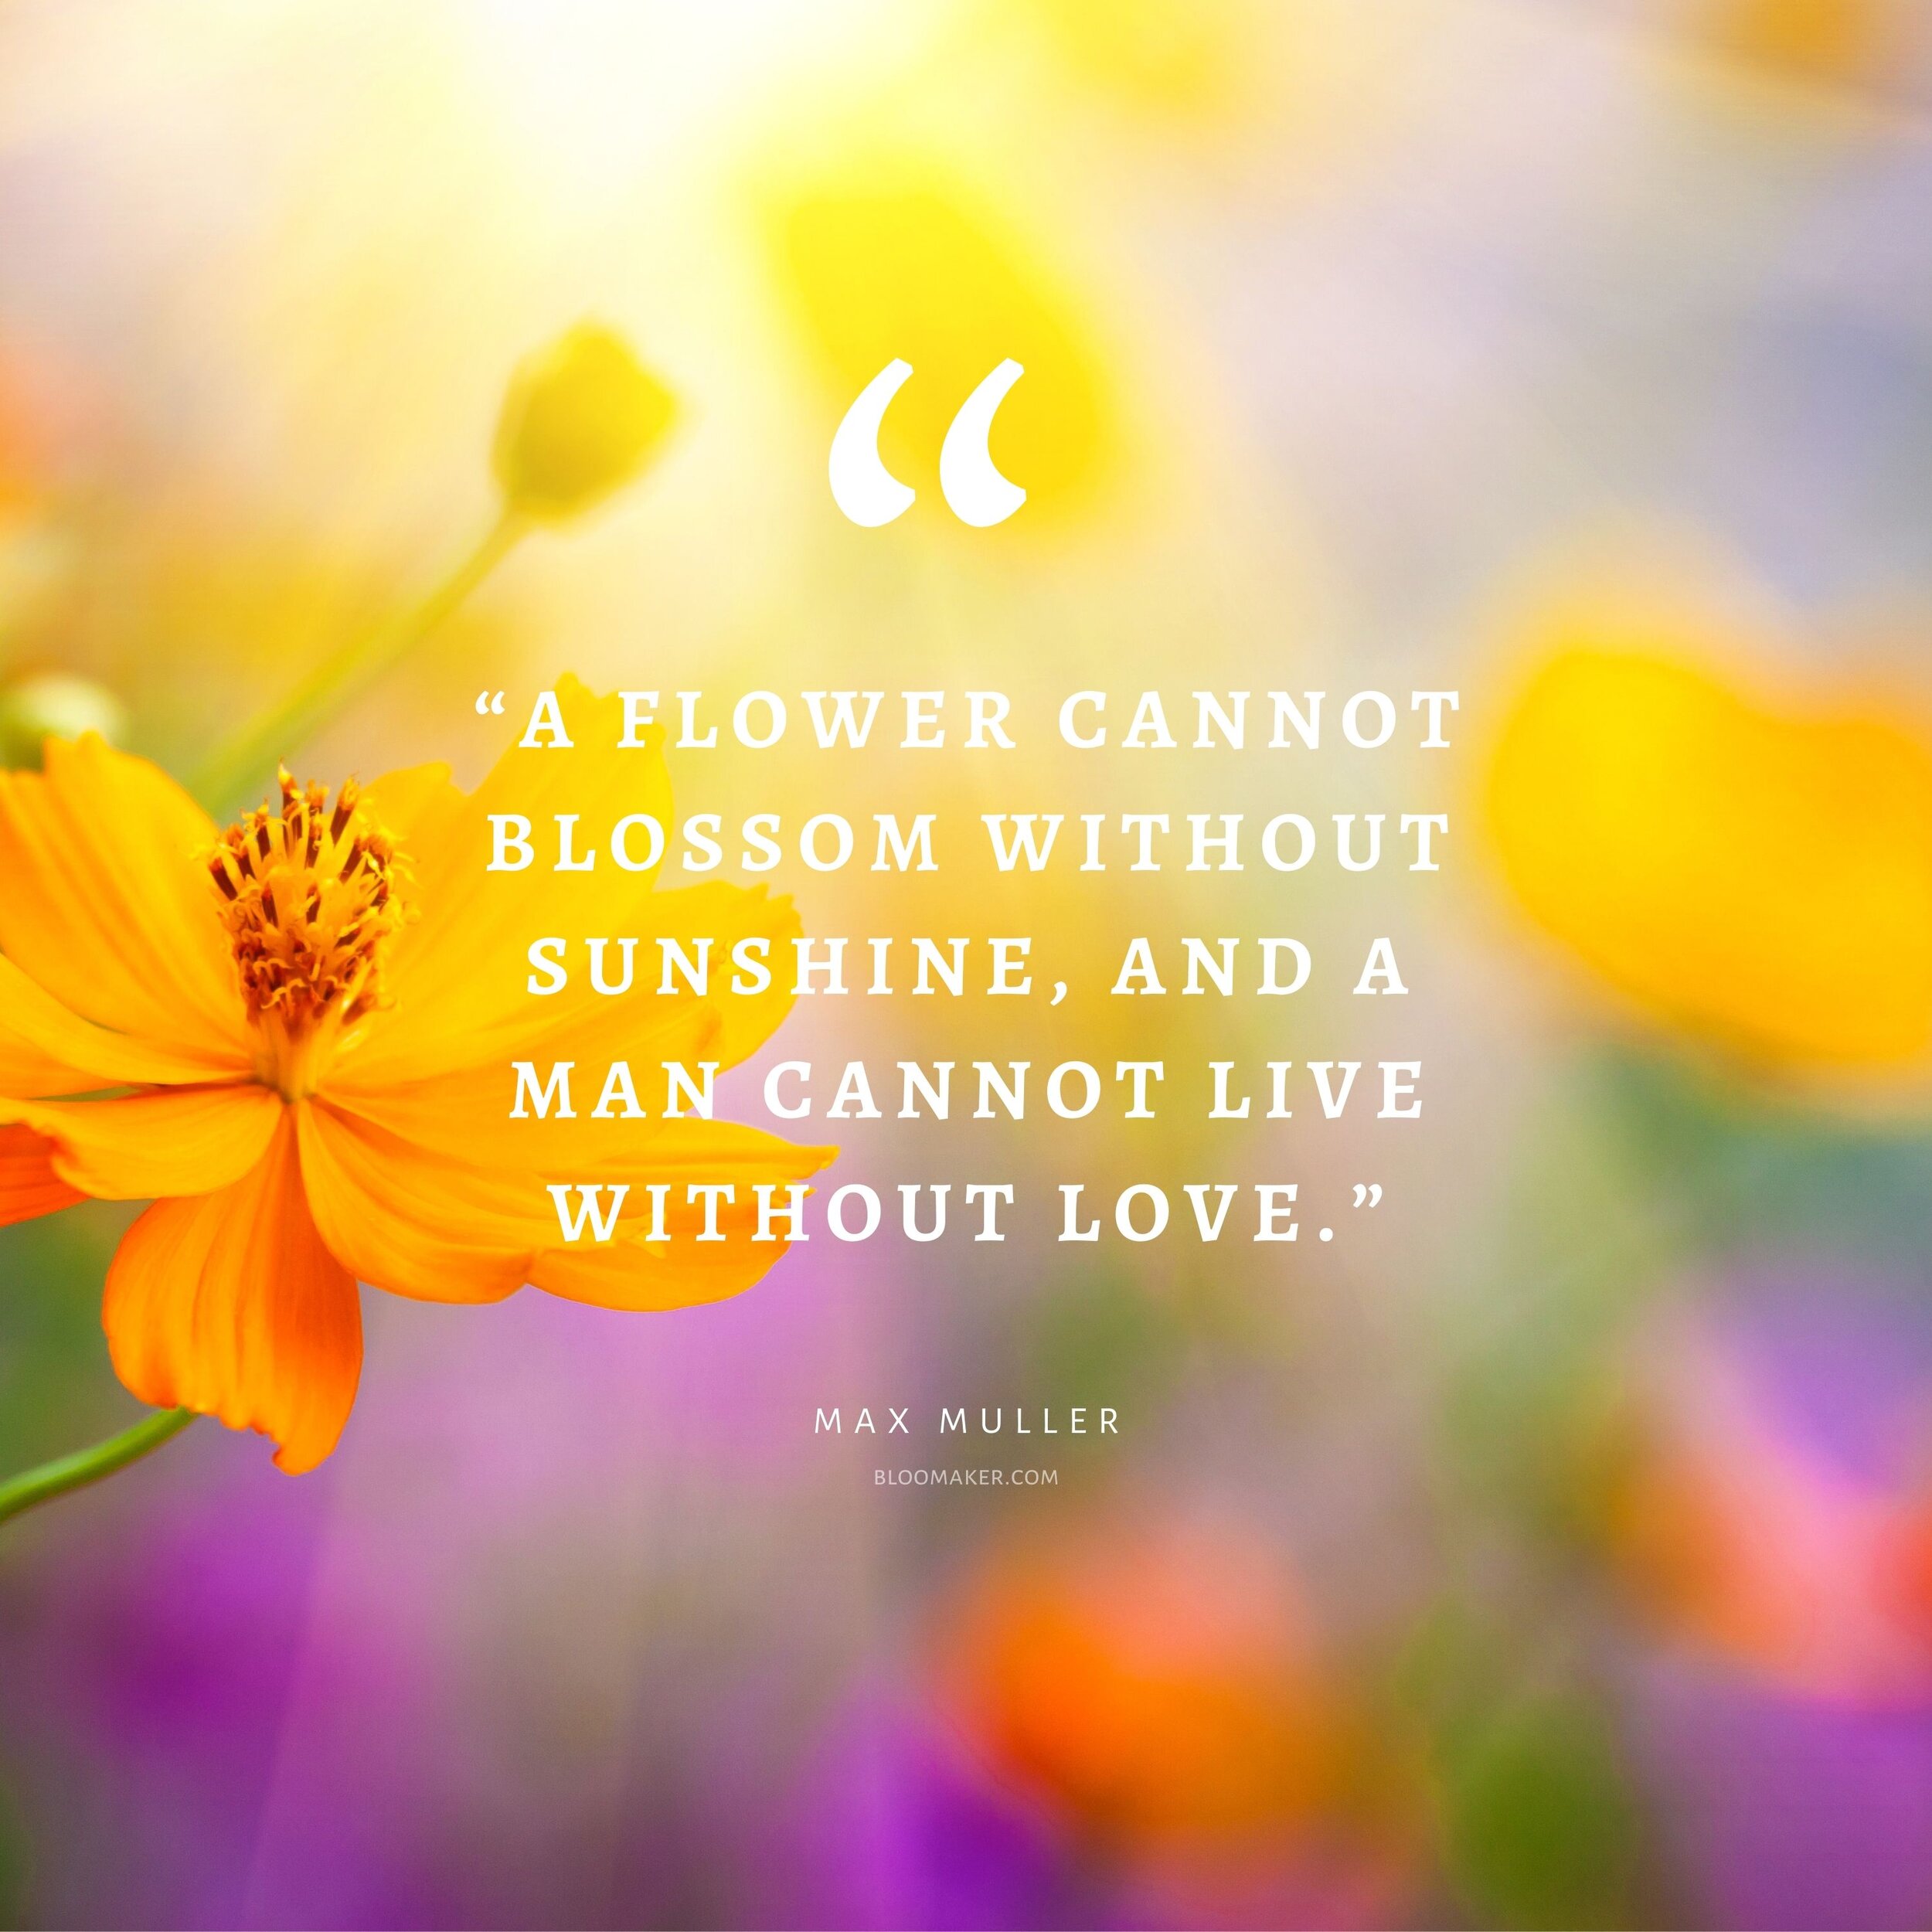 55 Inspirational Flower Quotes - Beautiful Motivational Sayings with